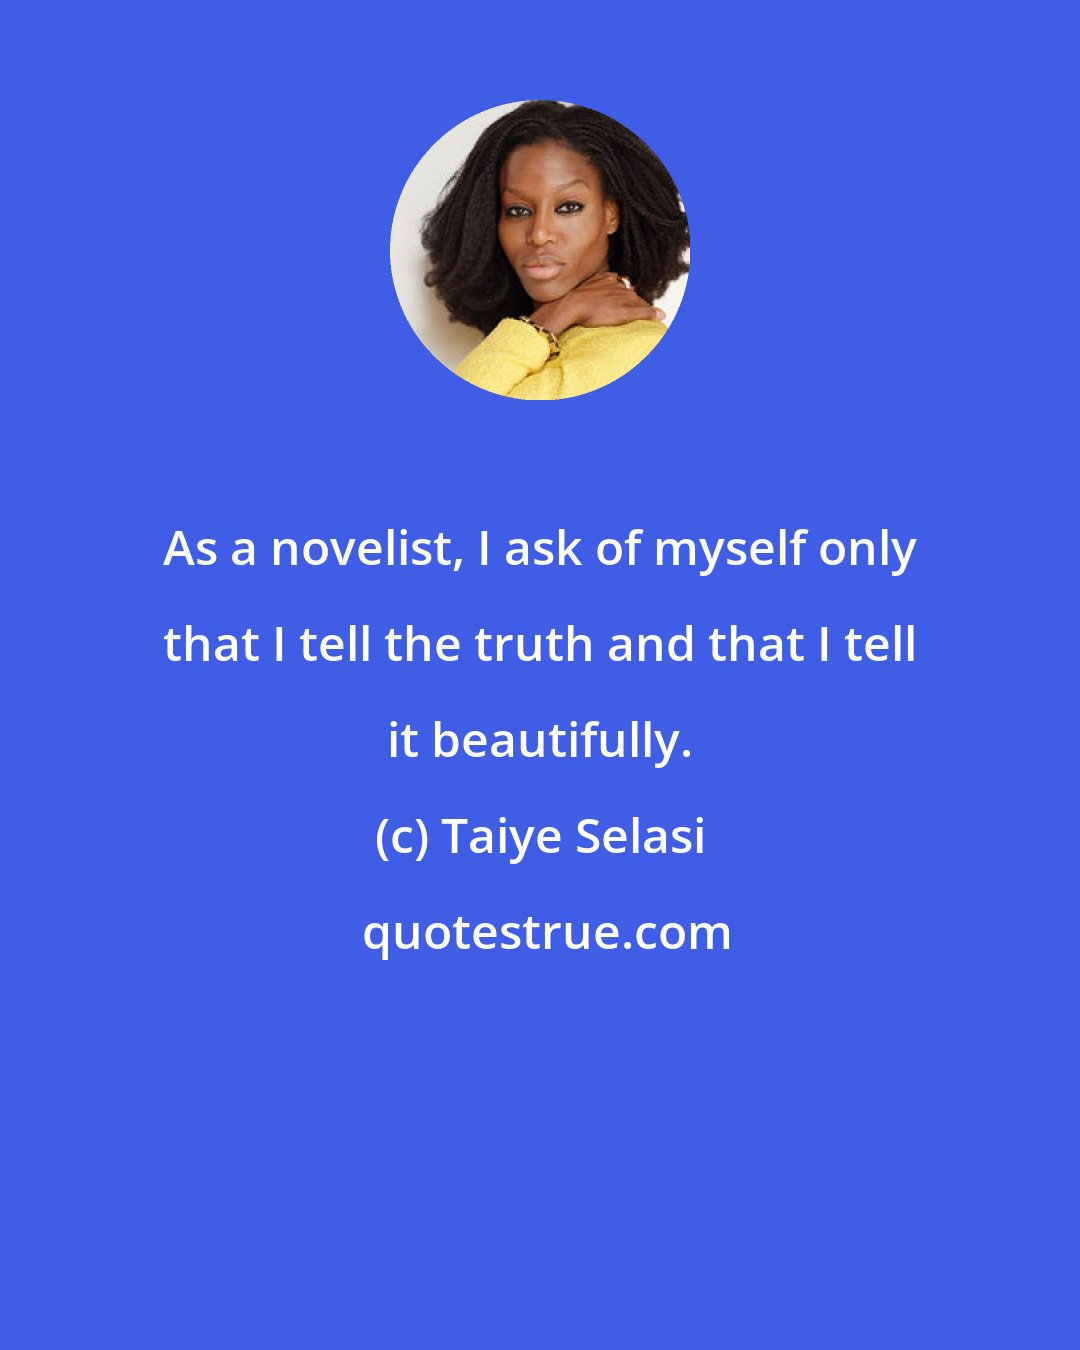 Taiye Selasi: As a novelist, I ask of myself only that I tell the truth and that I tell it beautifully.